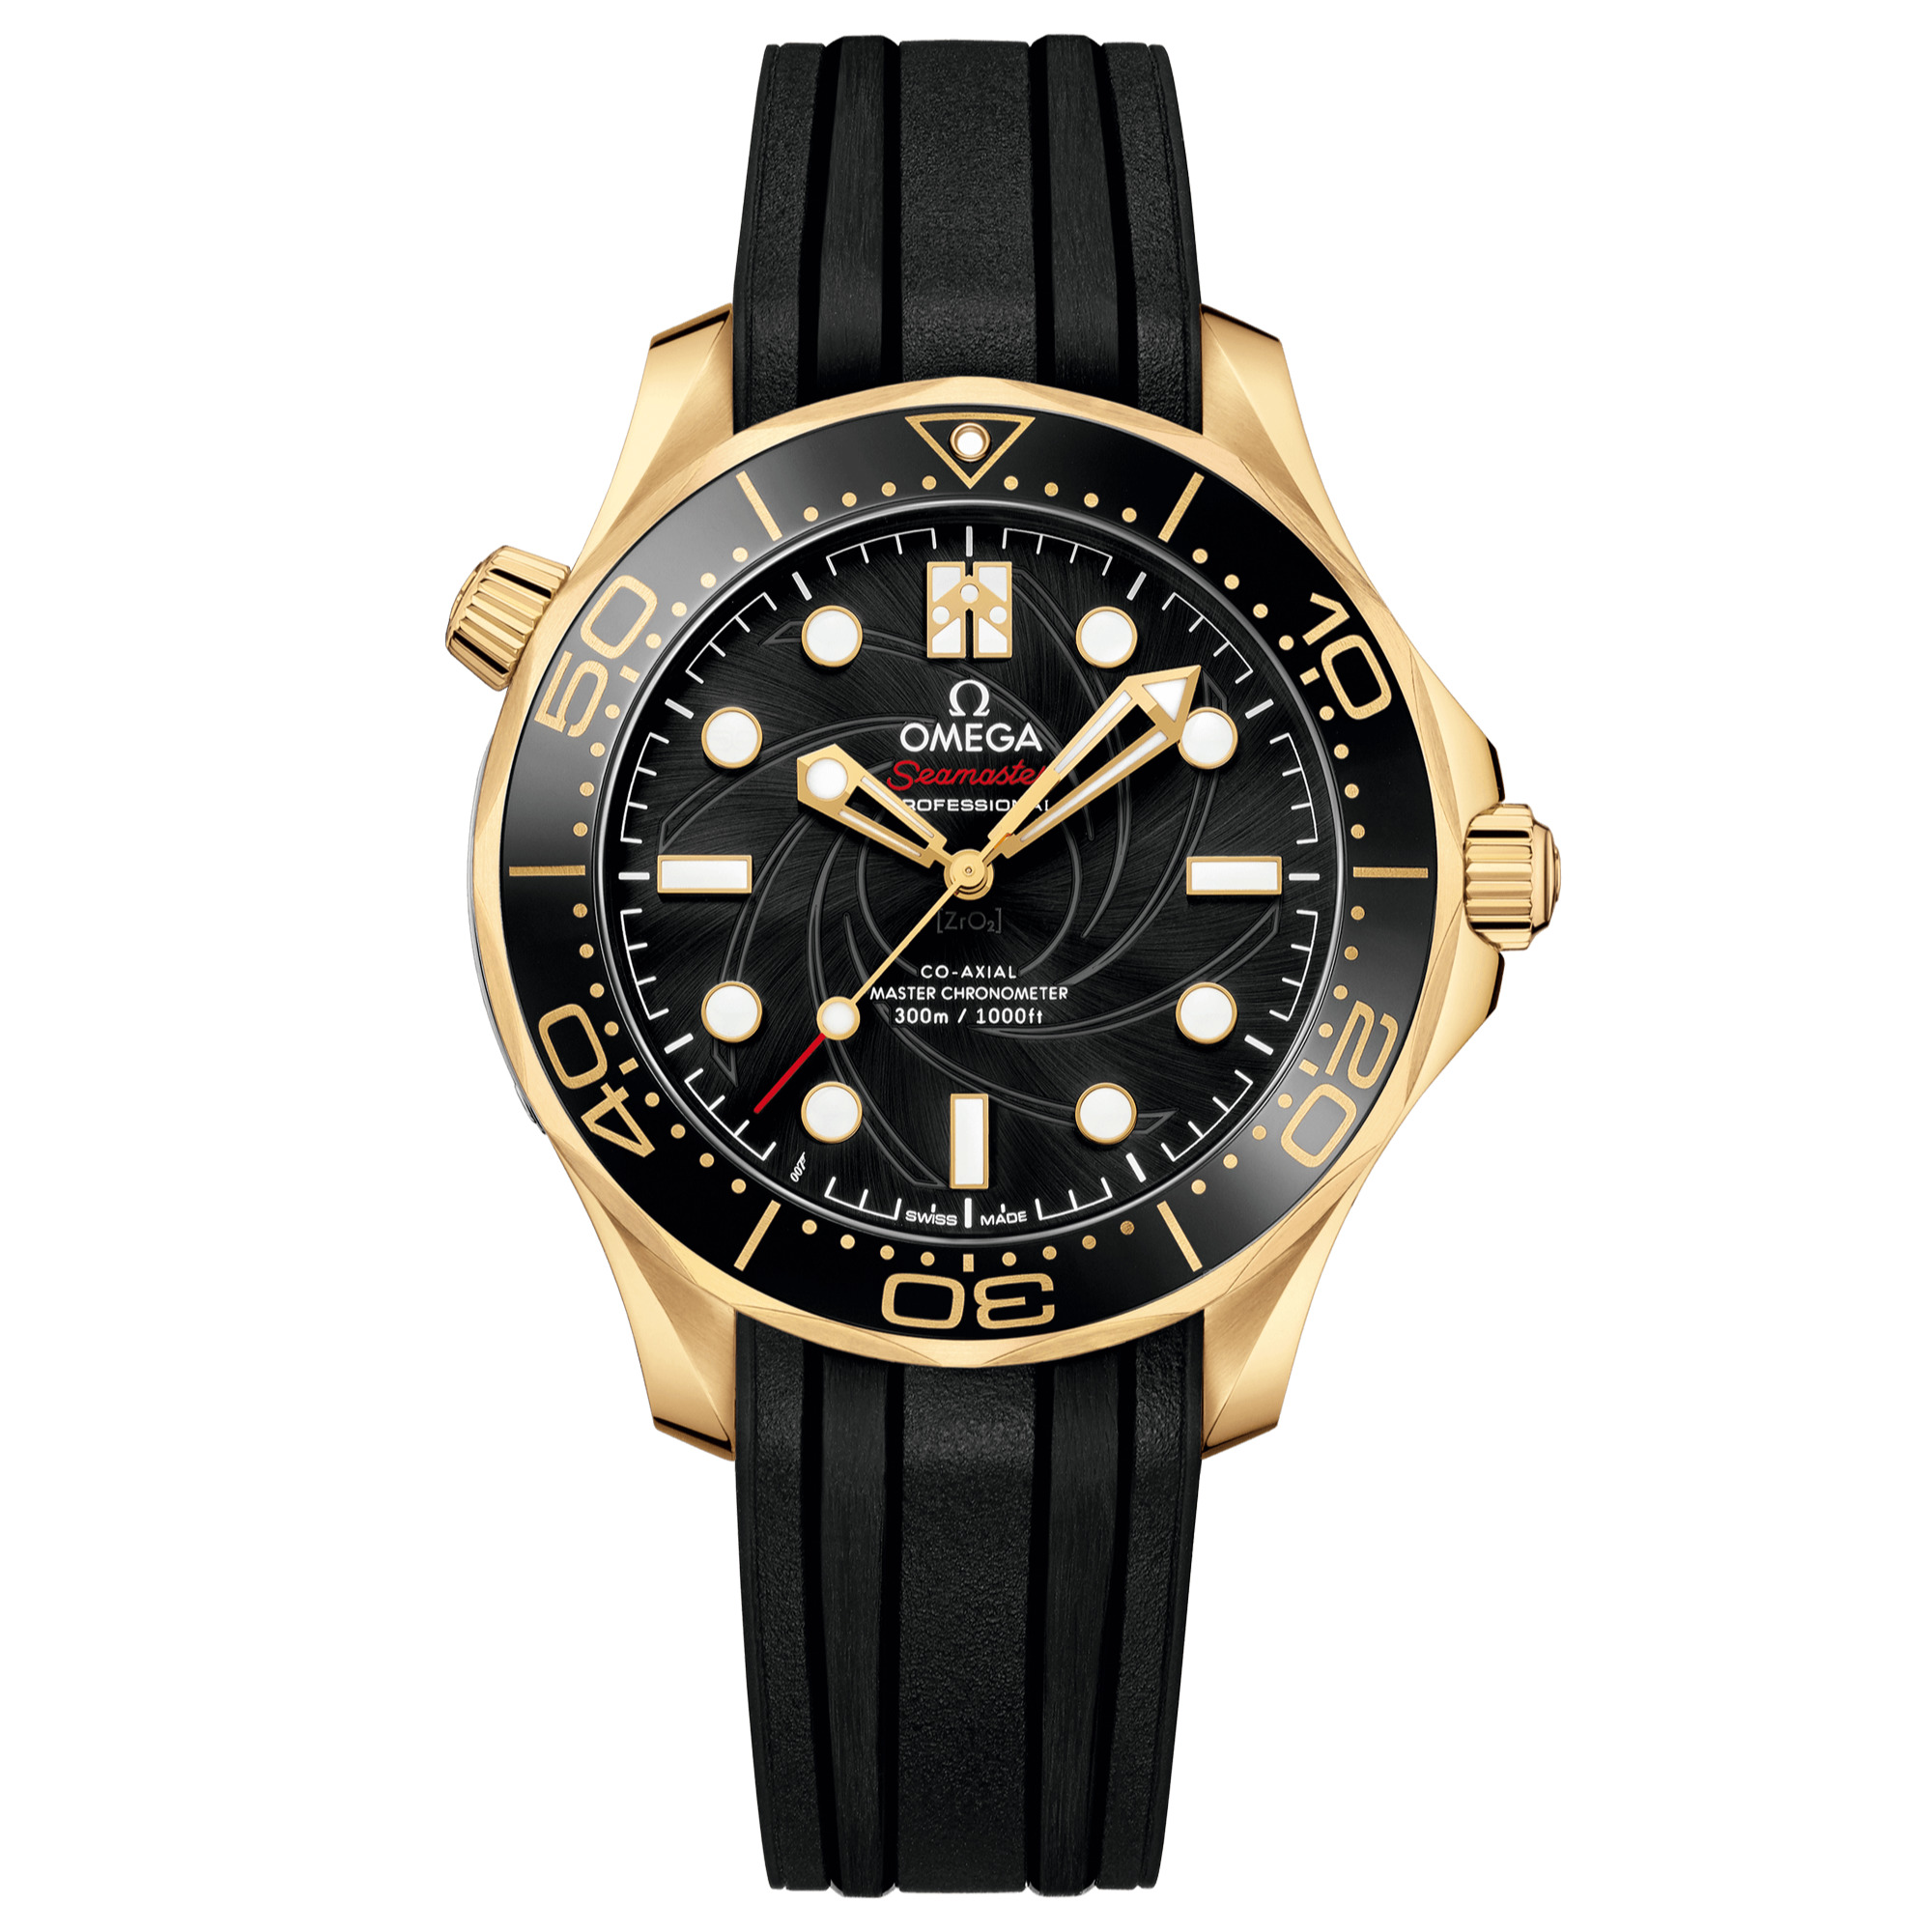 Omega - Seamaster Diver 300 M Co-Axial Master Chronometer 42 mm